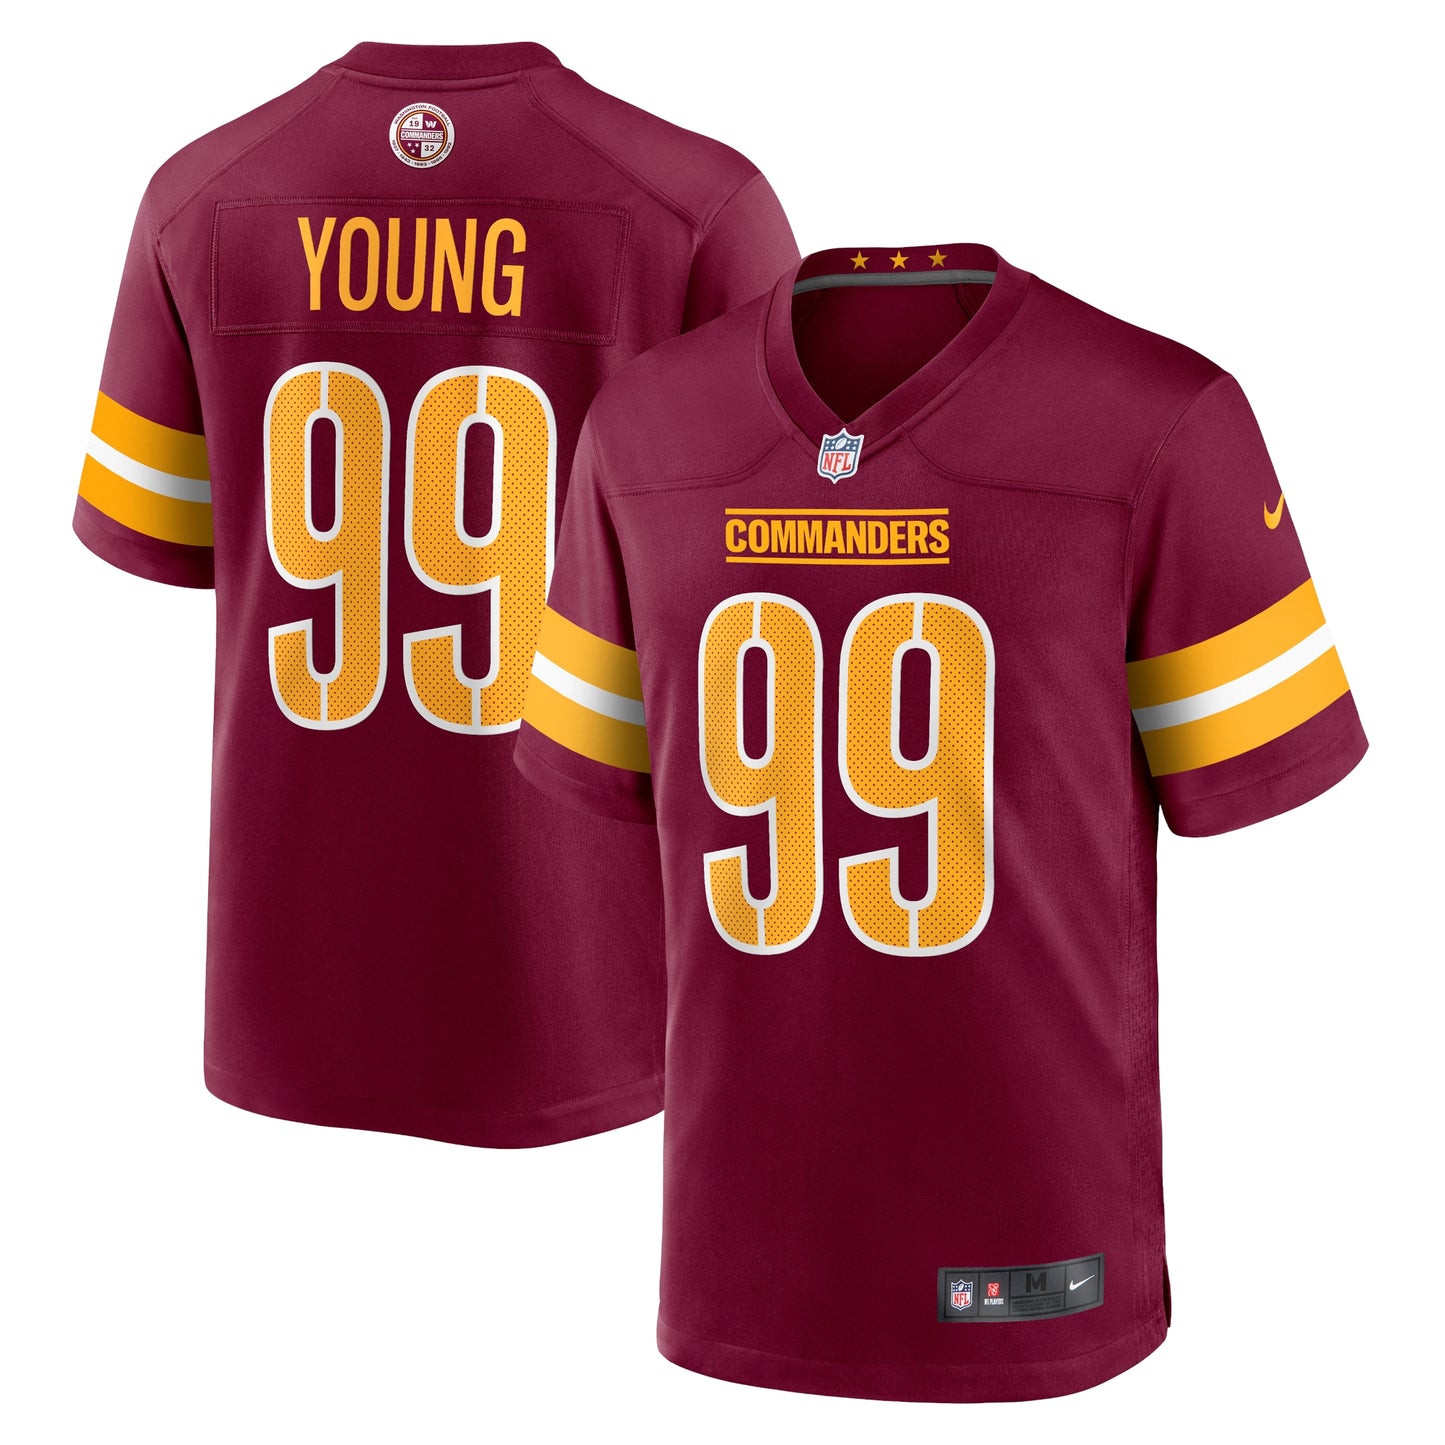 Chase Young Washington Commanders Nike Youth Game Jersey - Burgundy